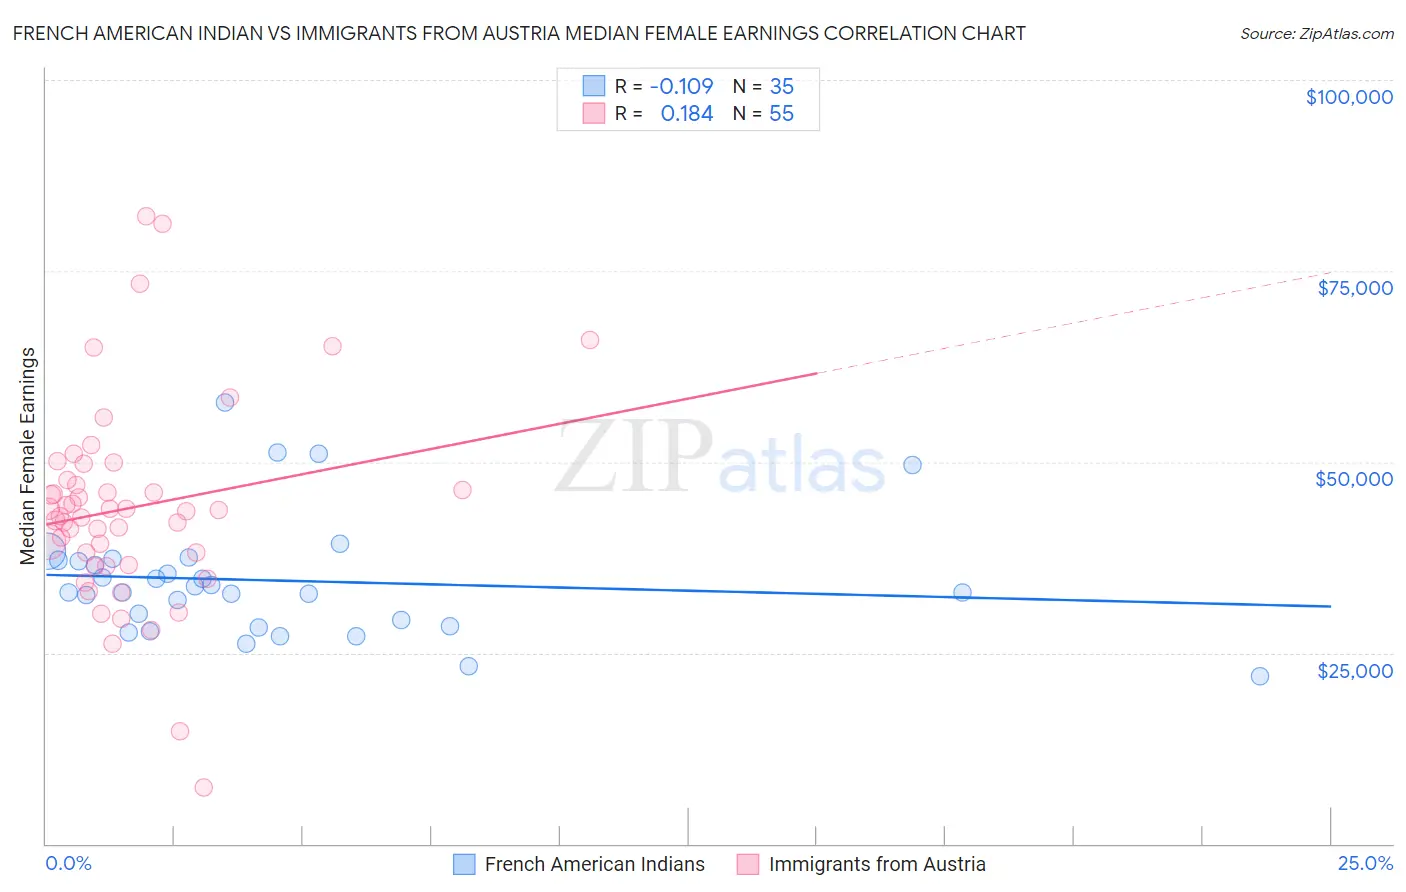 French American Indian vs Immigrants from Austria Median Female Earnings